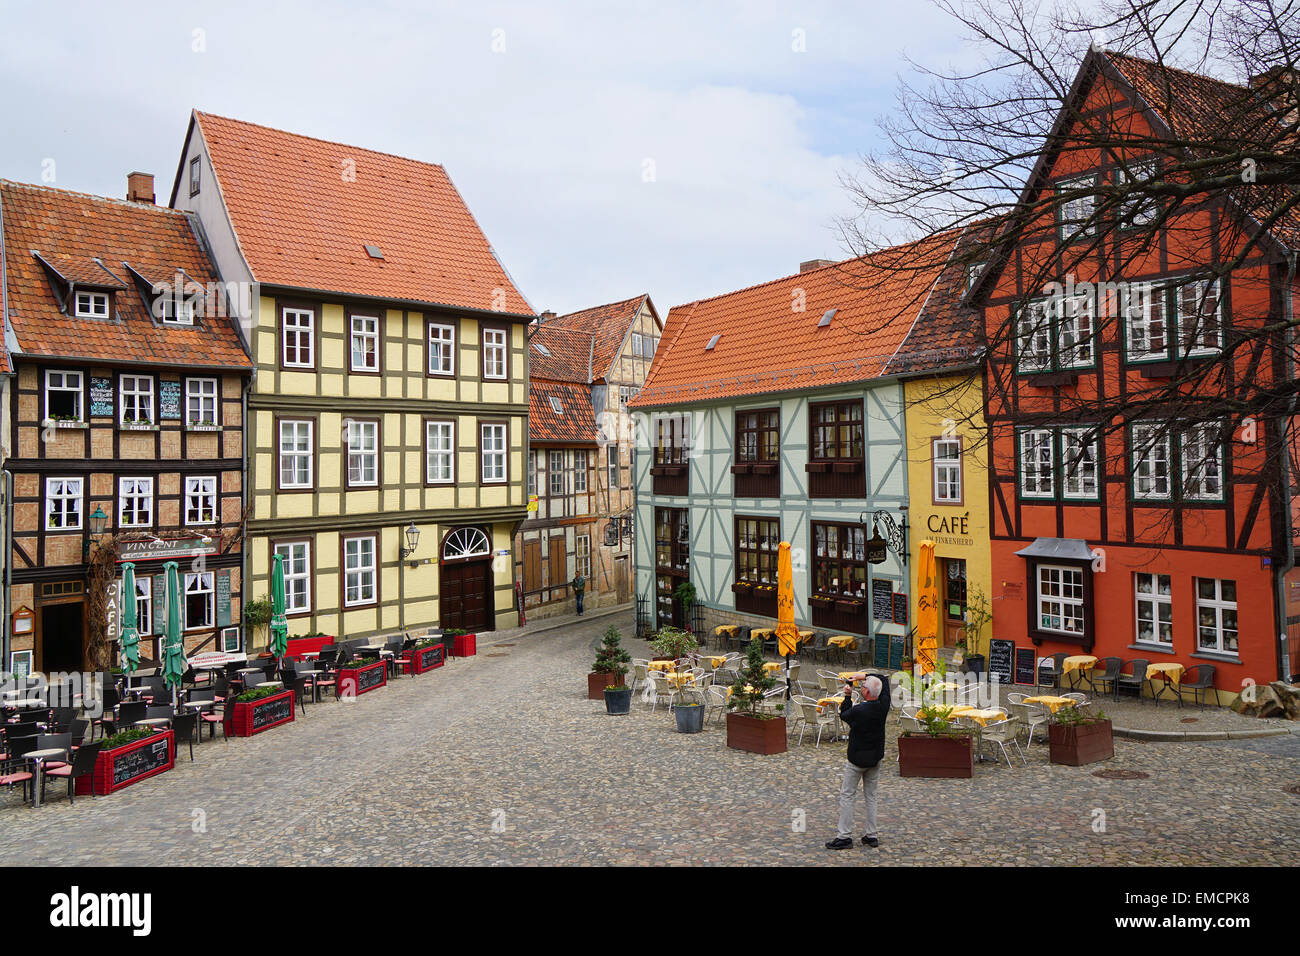 Quedlinburg, Germany - April 16, 2015: Tourist taking photograph of the colorful half-timbered houses on Schlossberg. Stock Photo